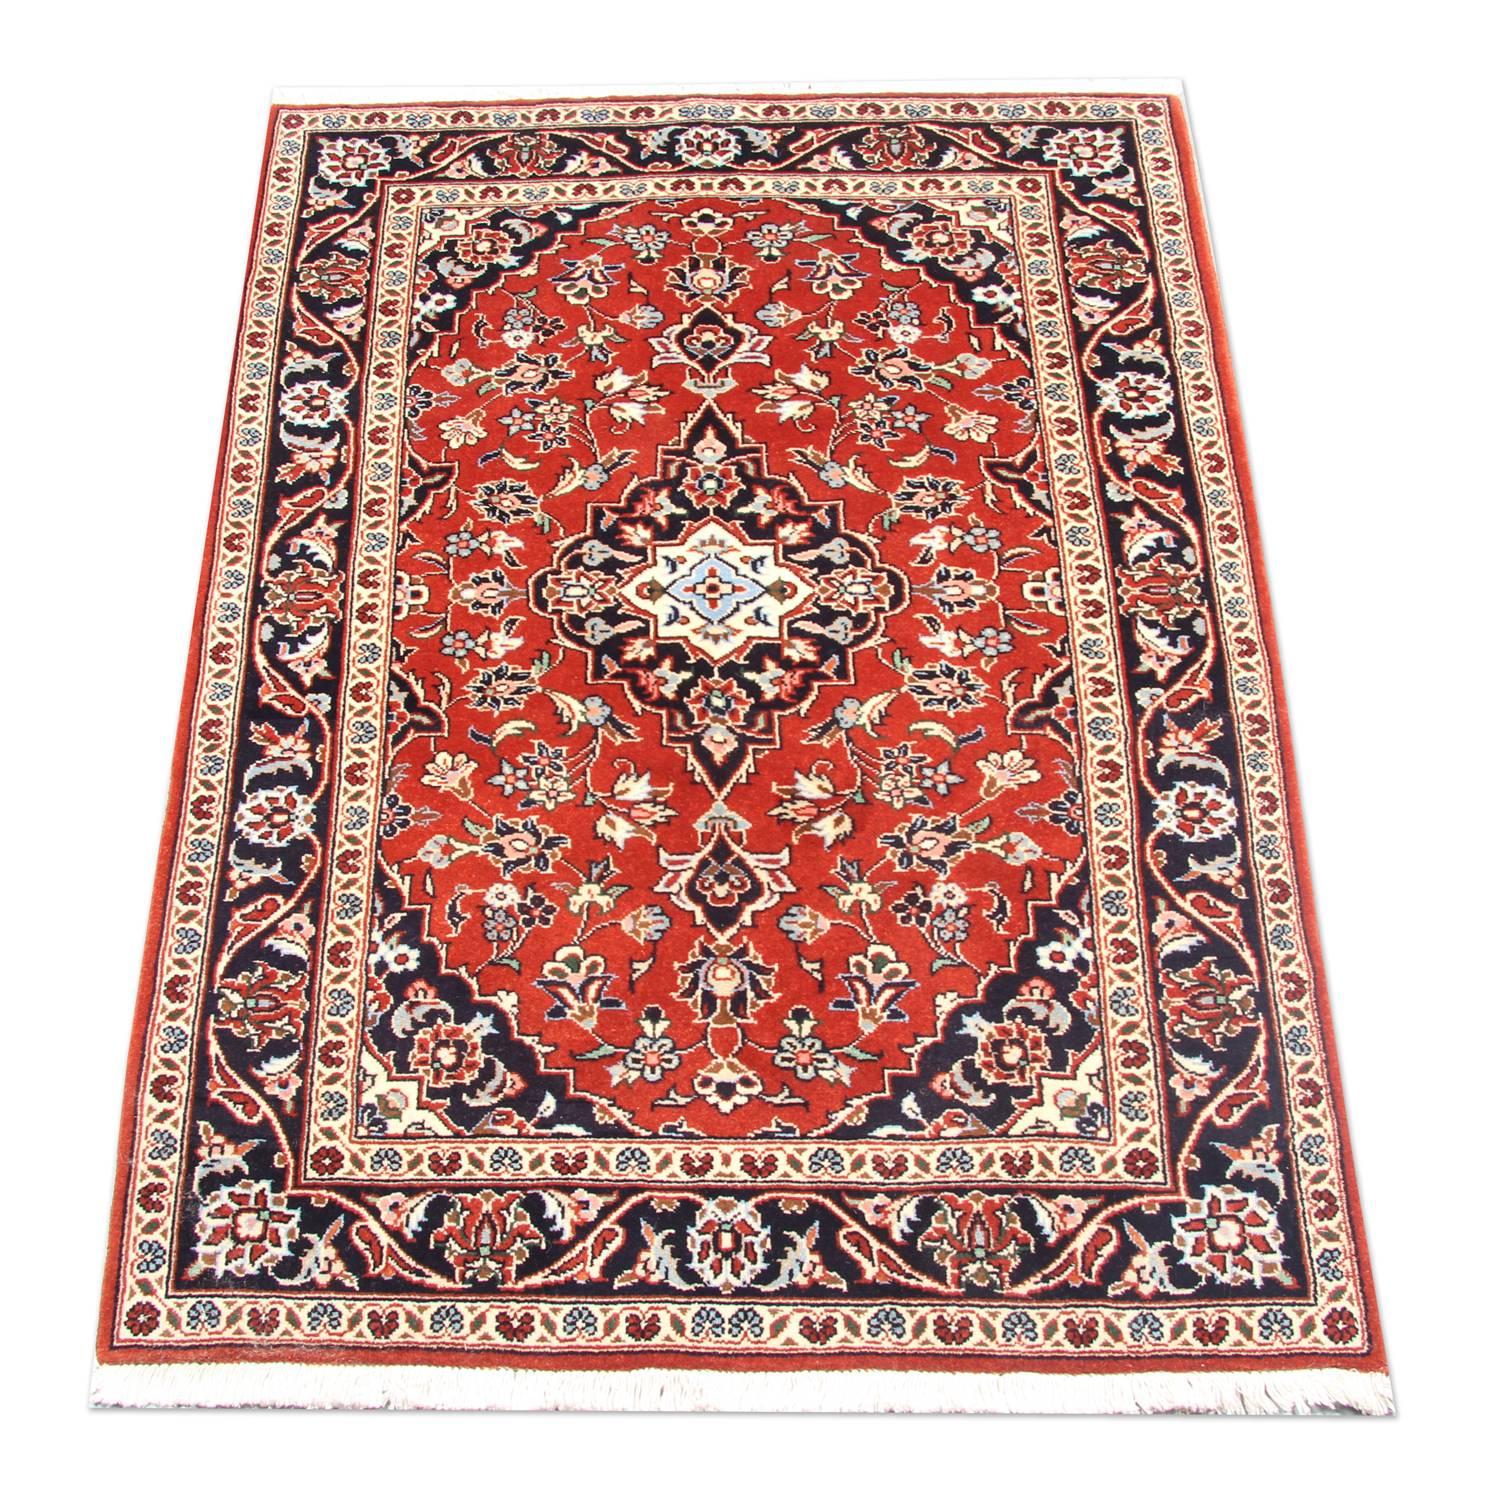 This fantastic wool rug was woven by hand in Turkey in the 1950s and features a traditional medallion design. Woven with a beautiful rich red background with accents of blue, cream, beige and white that make up the delicate floral medallion and